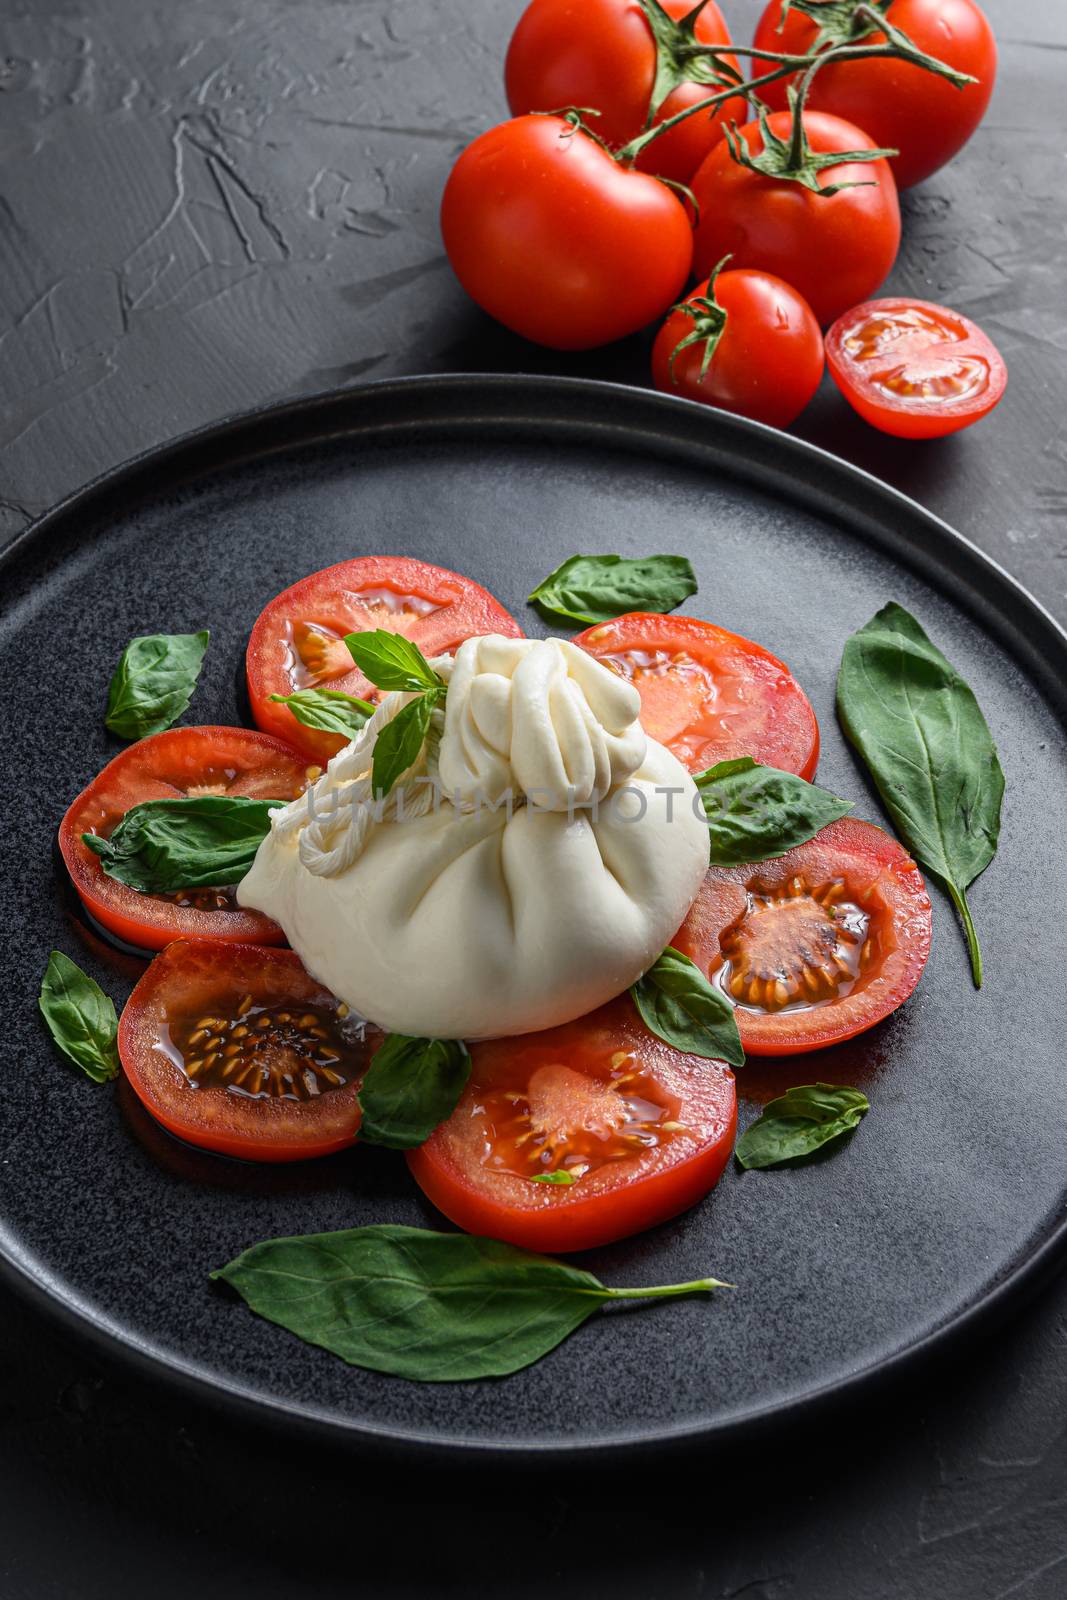 Burrata, Italian fresh cheese made from cream and milk of buffalo or cow. on black plate over black stone surface top view close up by Ilianesolenyi